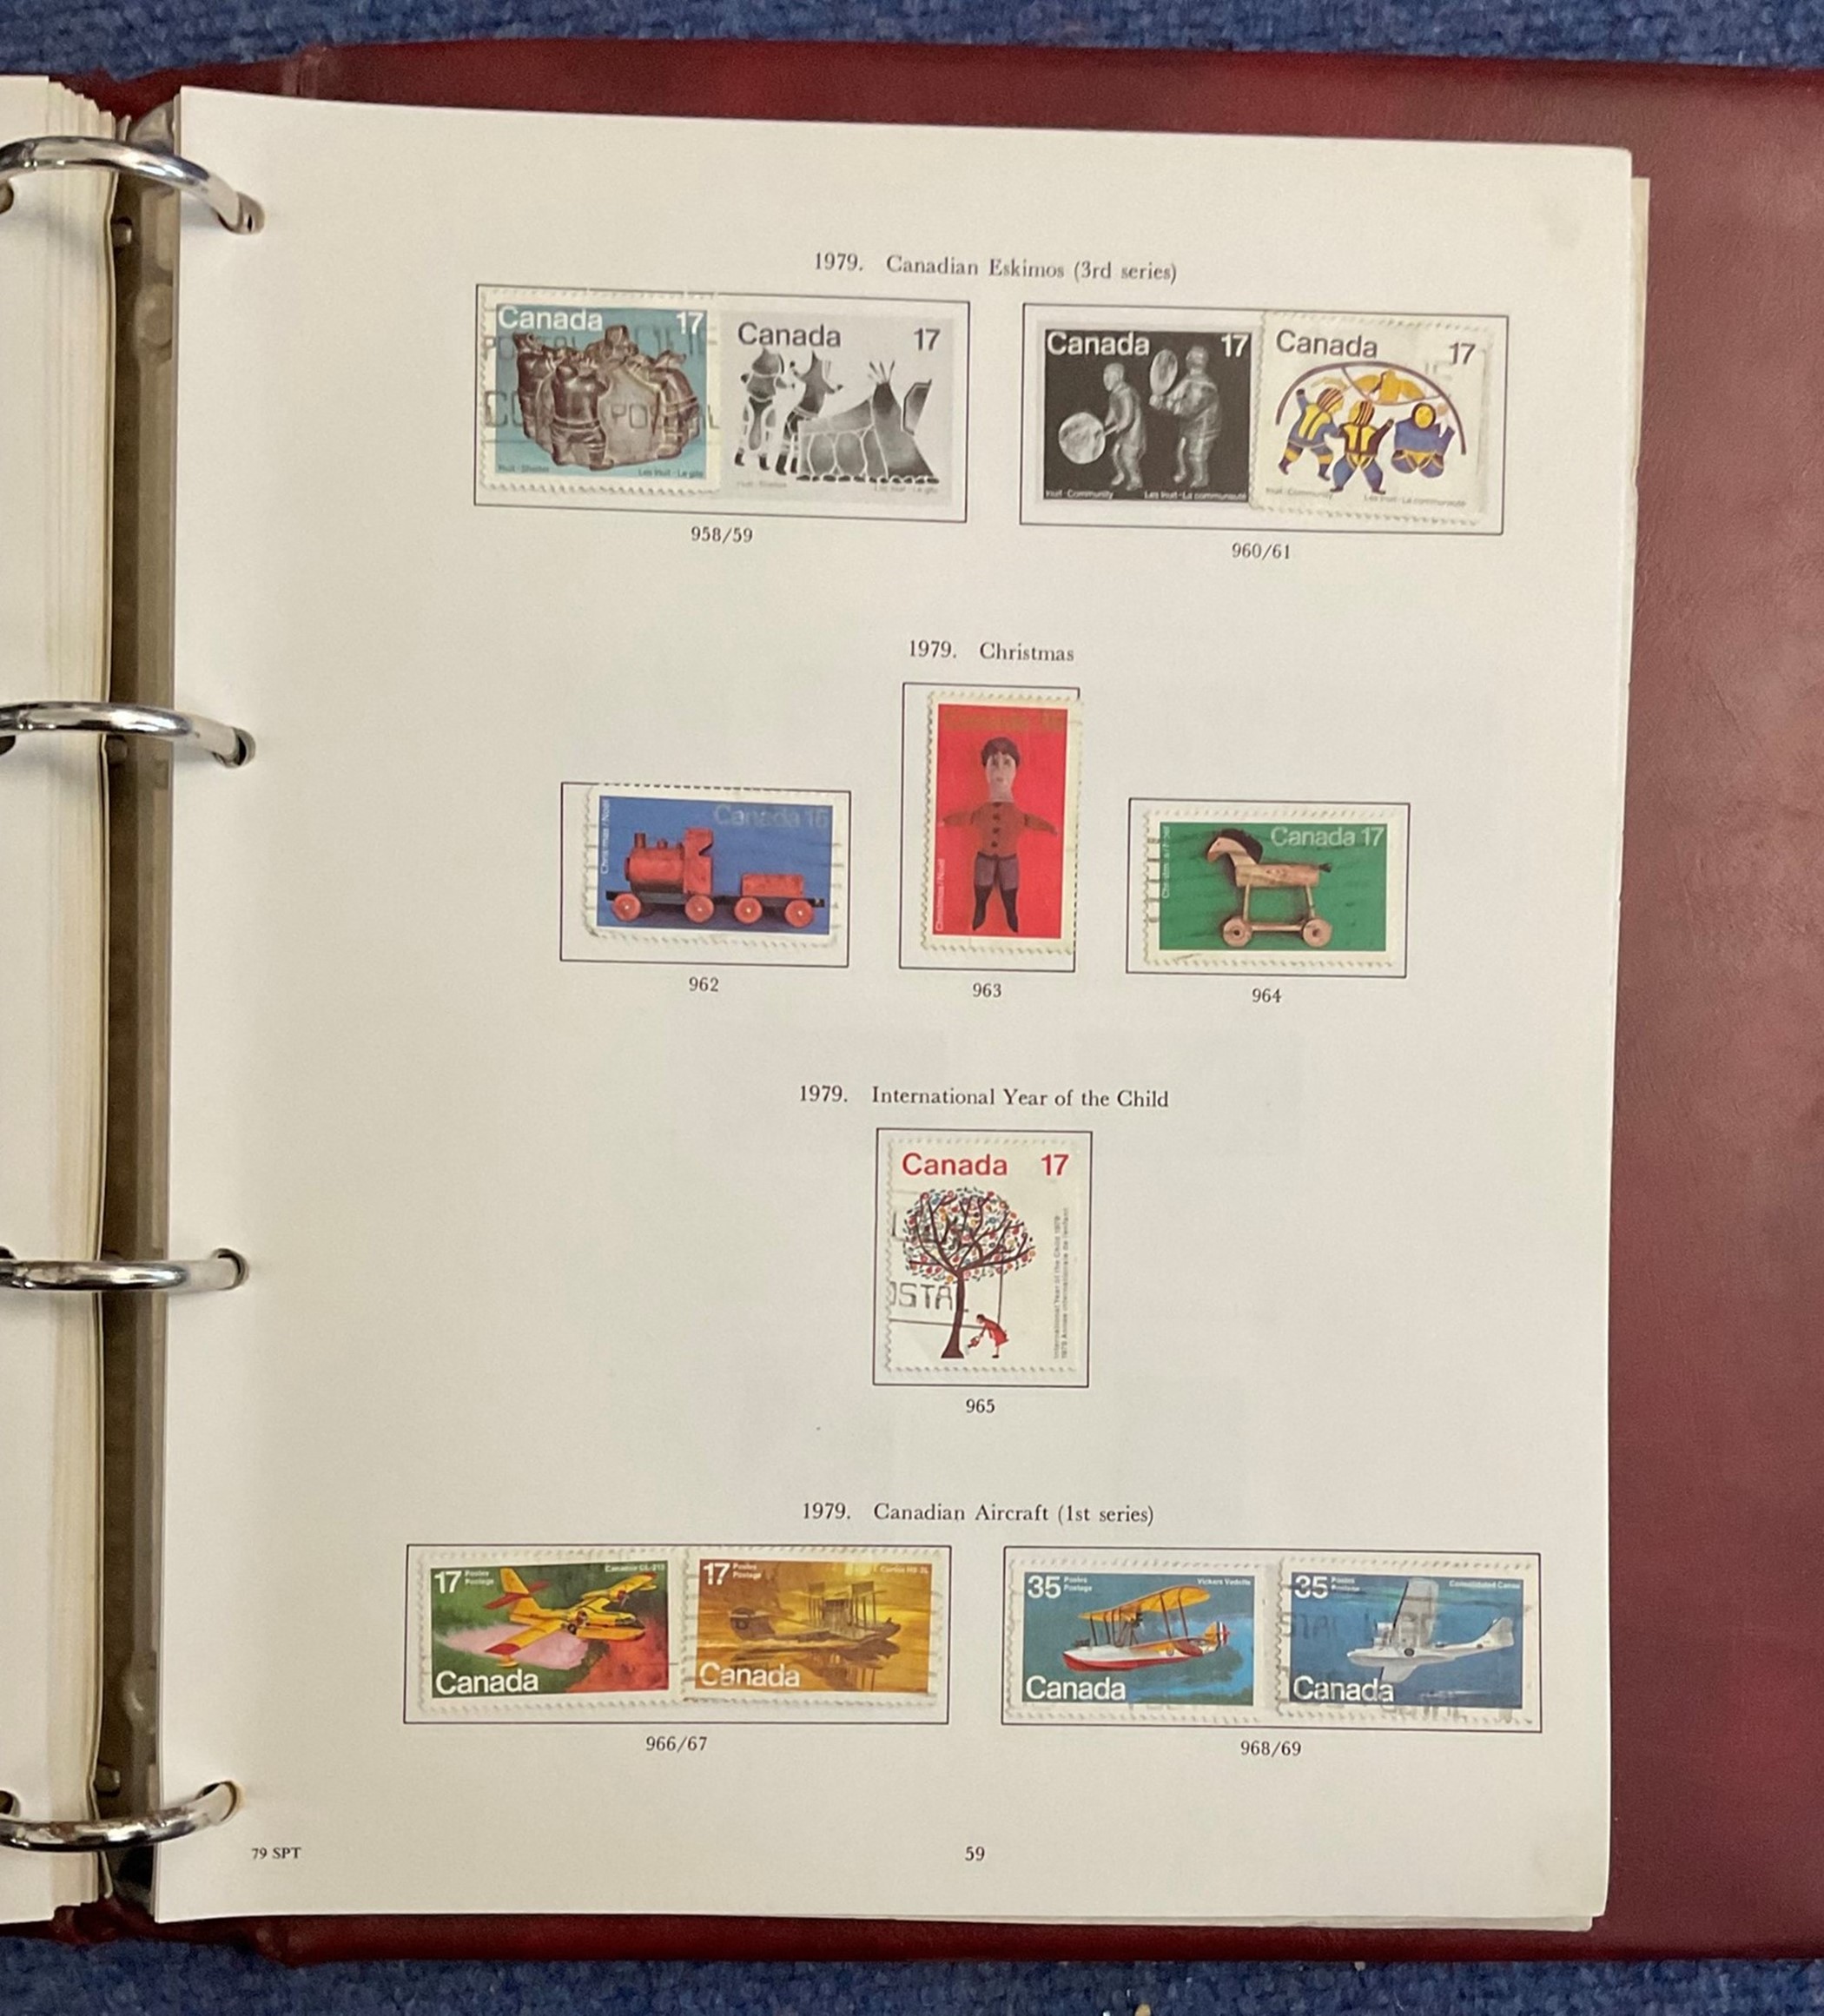 Stanley Gibbons Canada Stamp Album with a range of 250 300 Stamps from SG 434, 1951 to SG 998, - Image 2 of 2